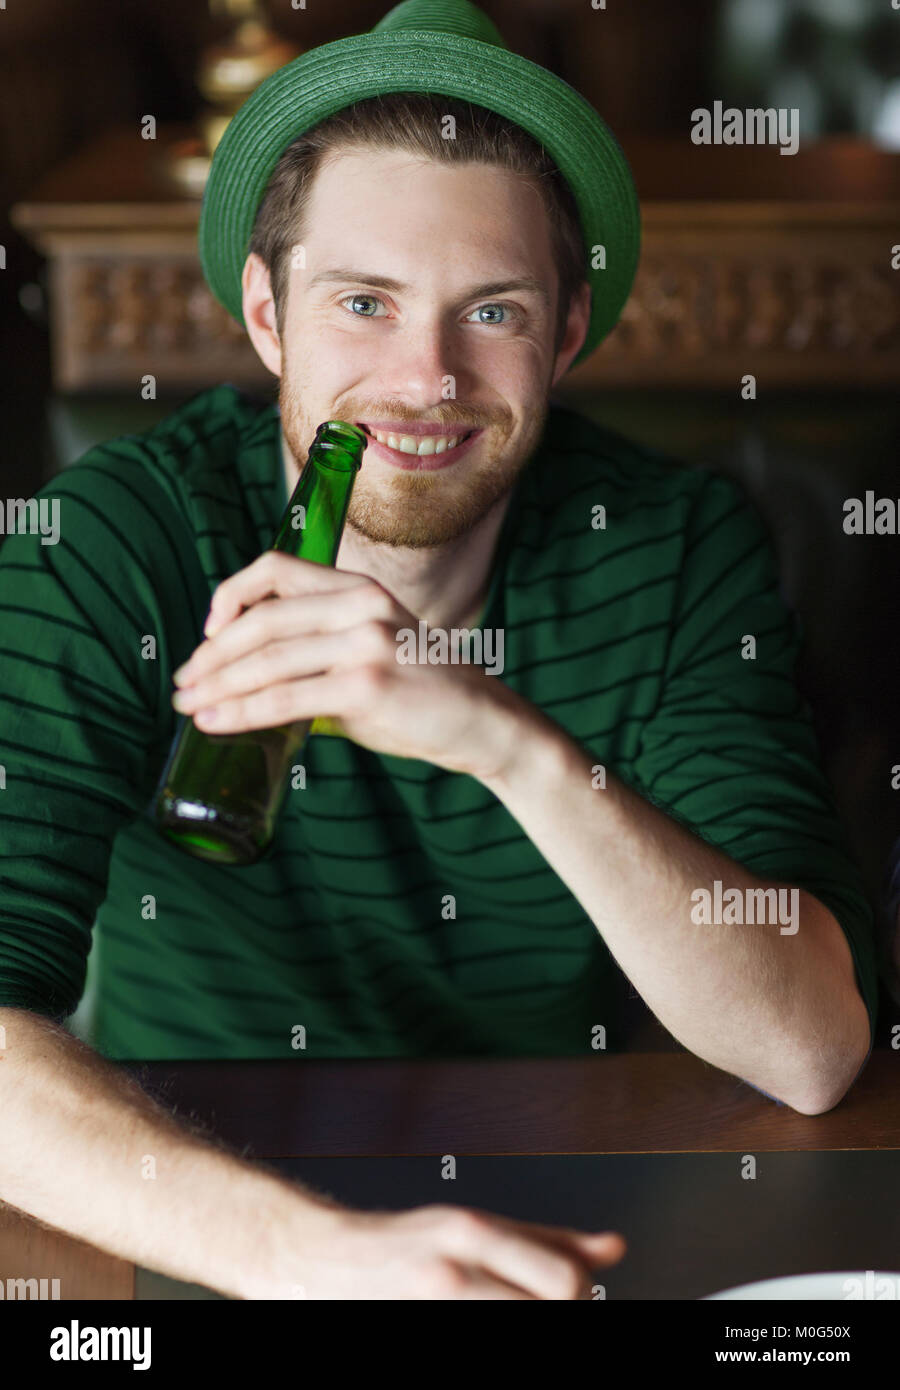 man drinking beer from green bottle at bar or pub Stock Photo